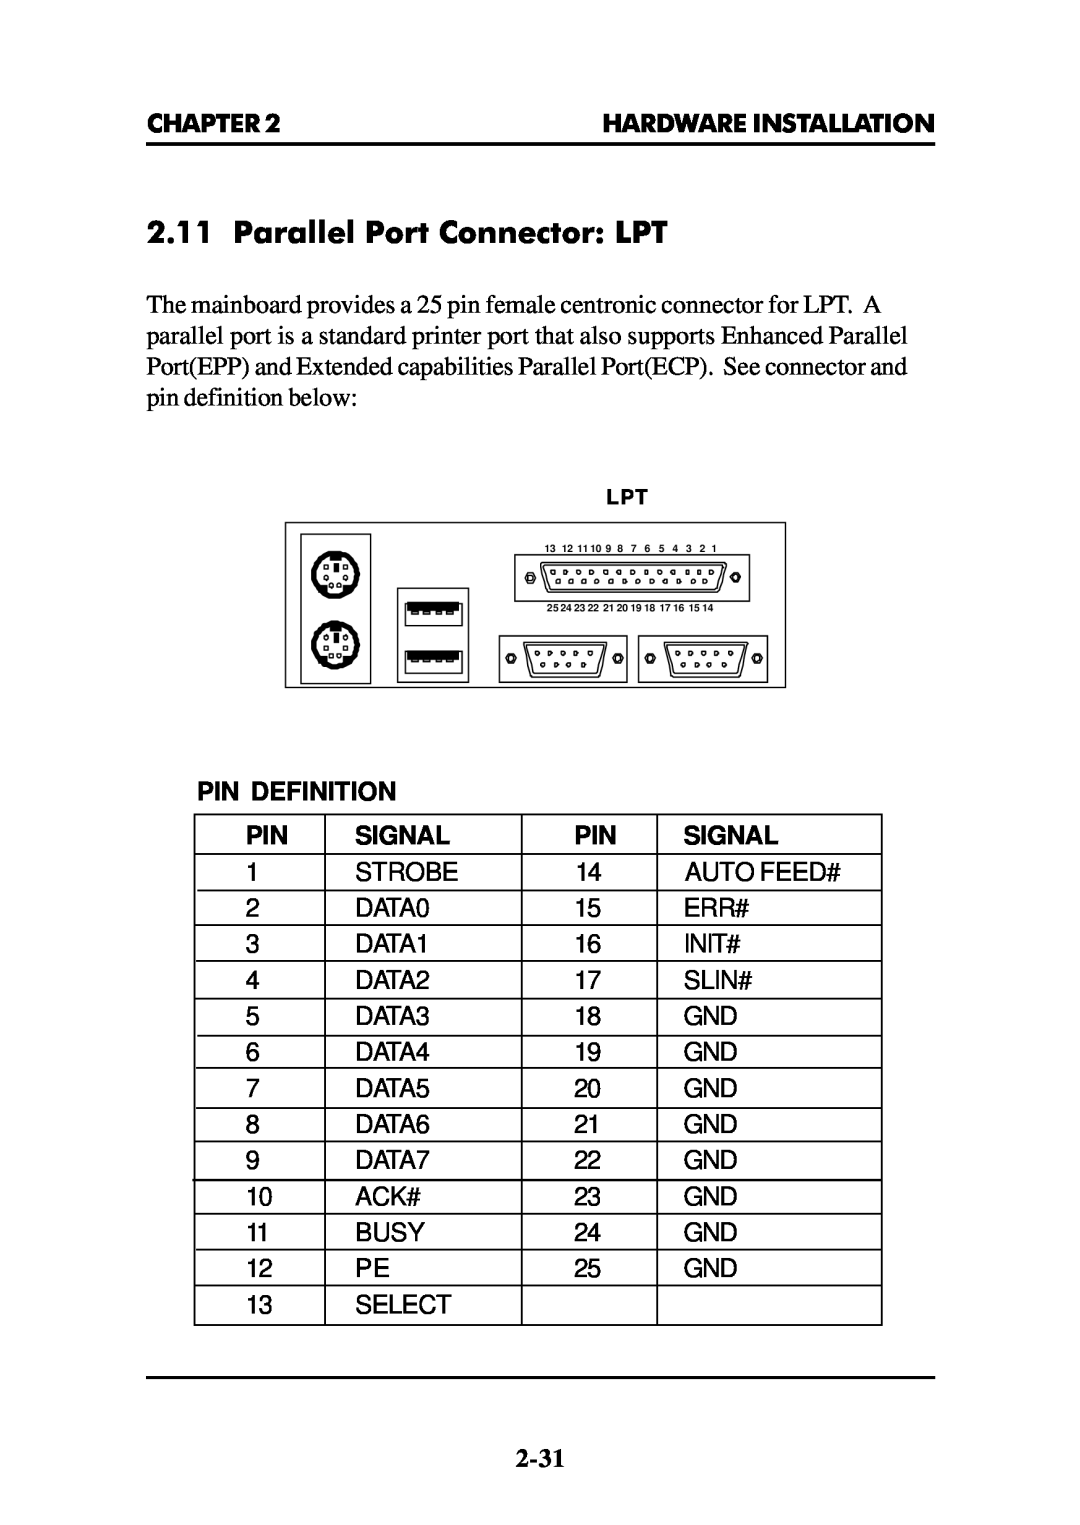 Intel MS-6112 manual Parallel Port Connector LPT, Pin Definition, Signal 